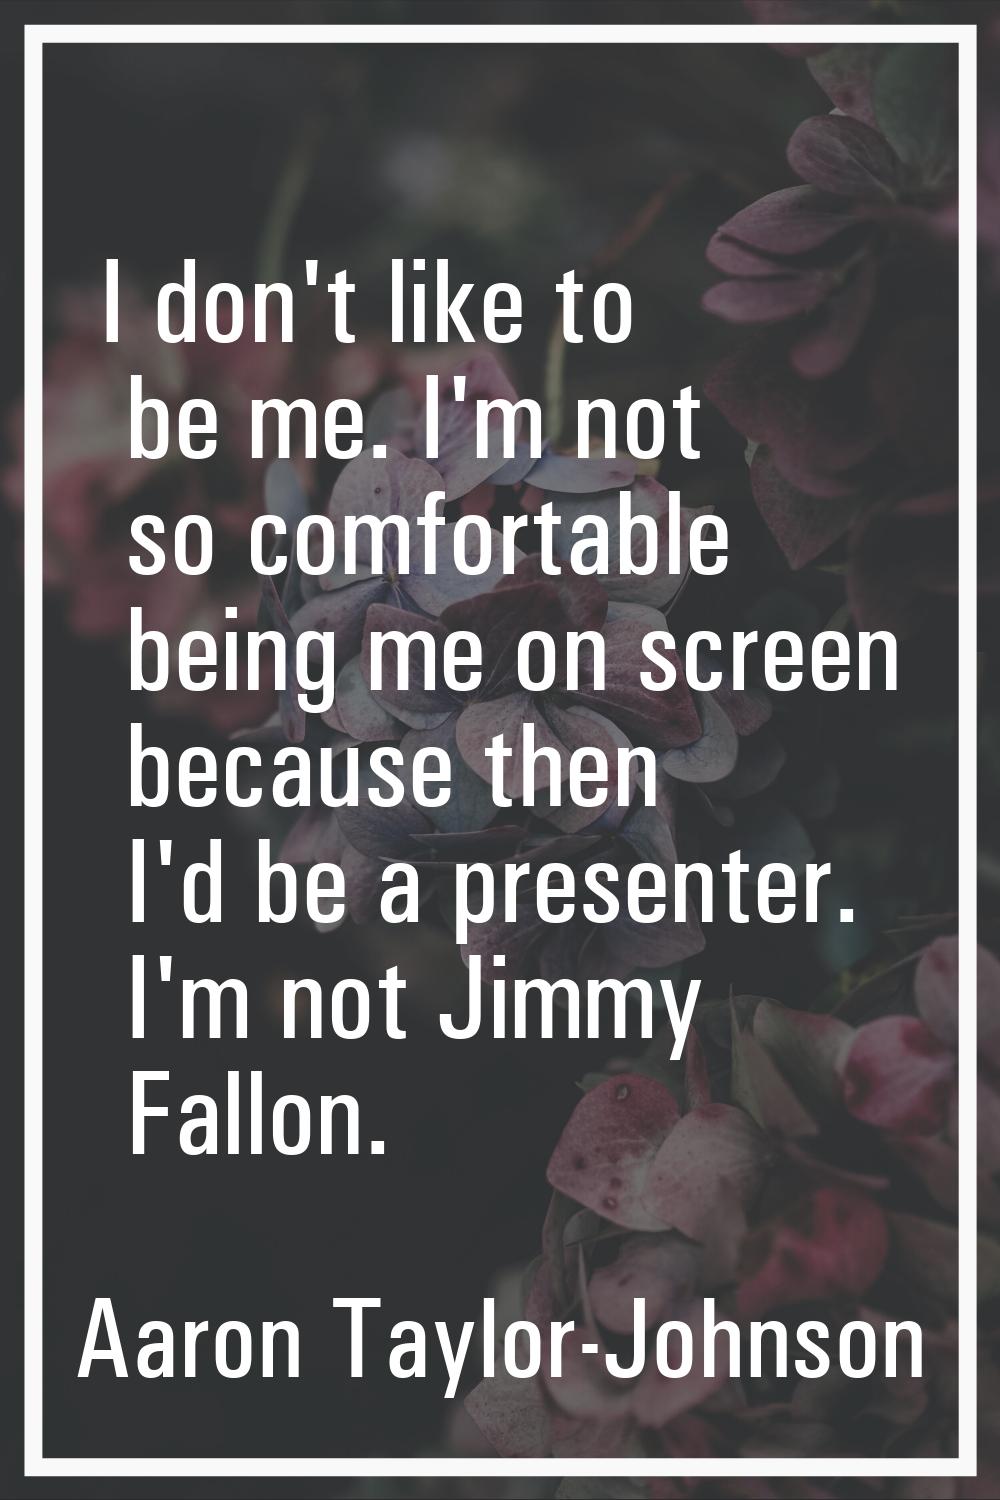 I don't like to be me. I'm not so comfortable being me on screen because then I'd be a presenter. I